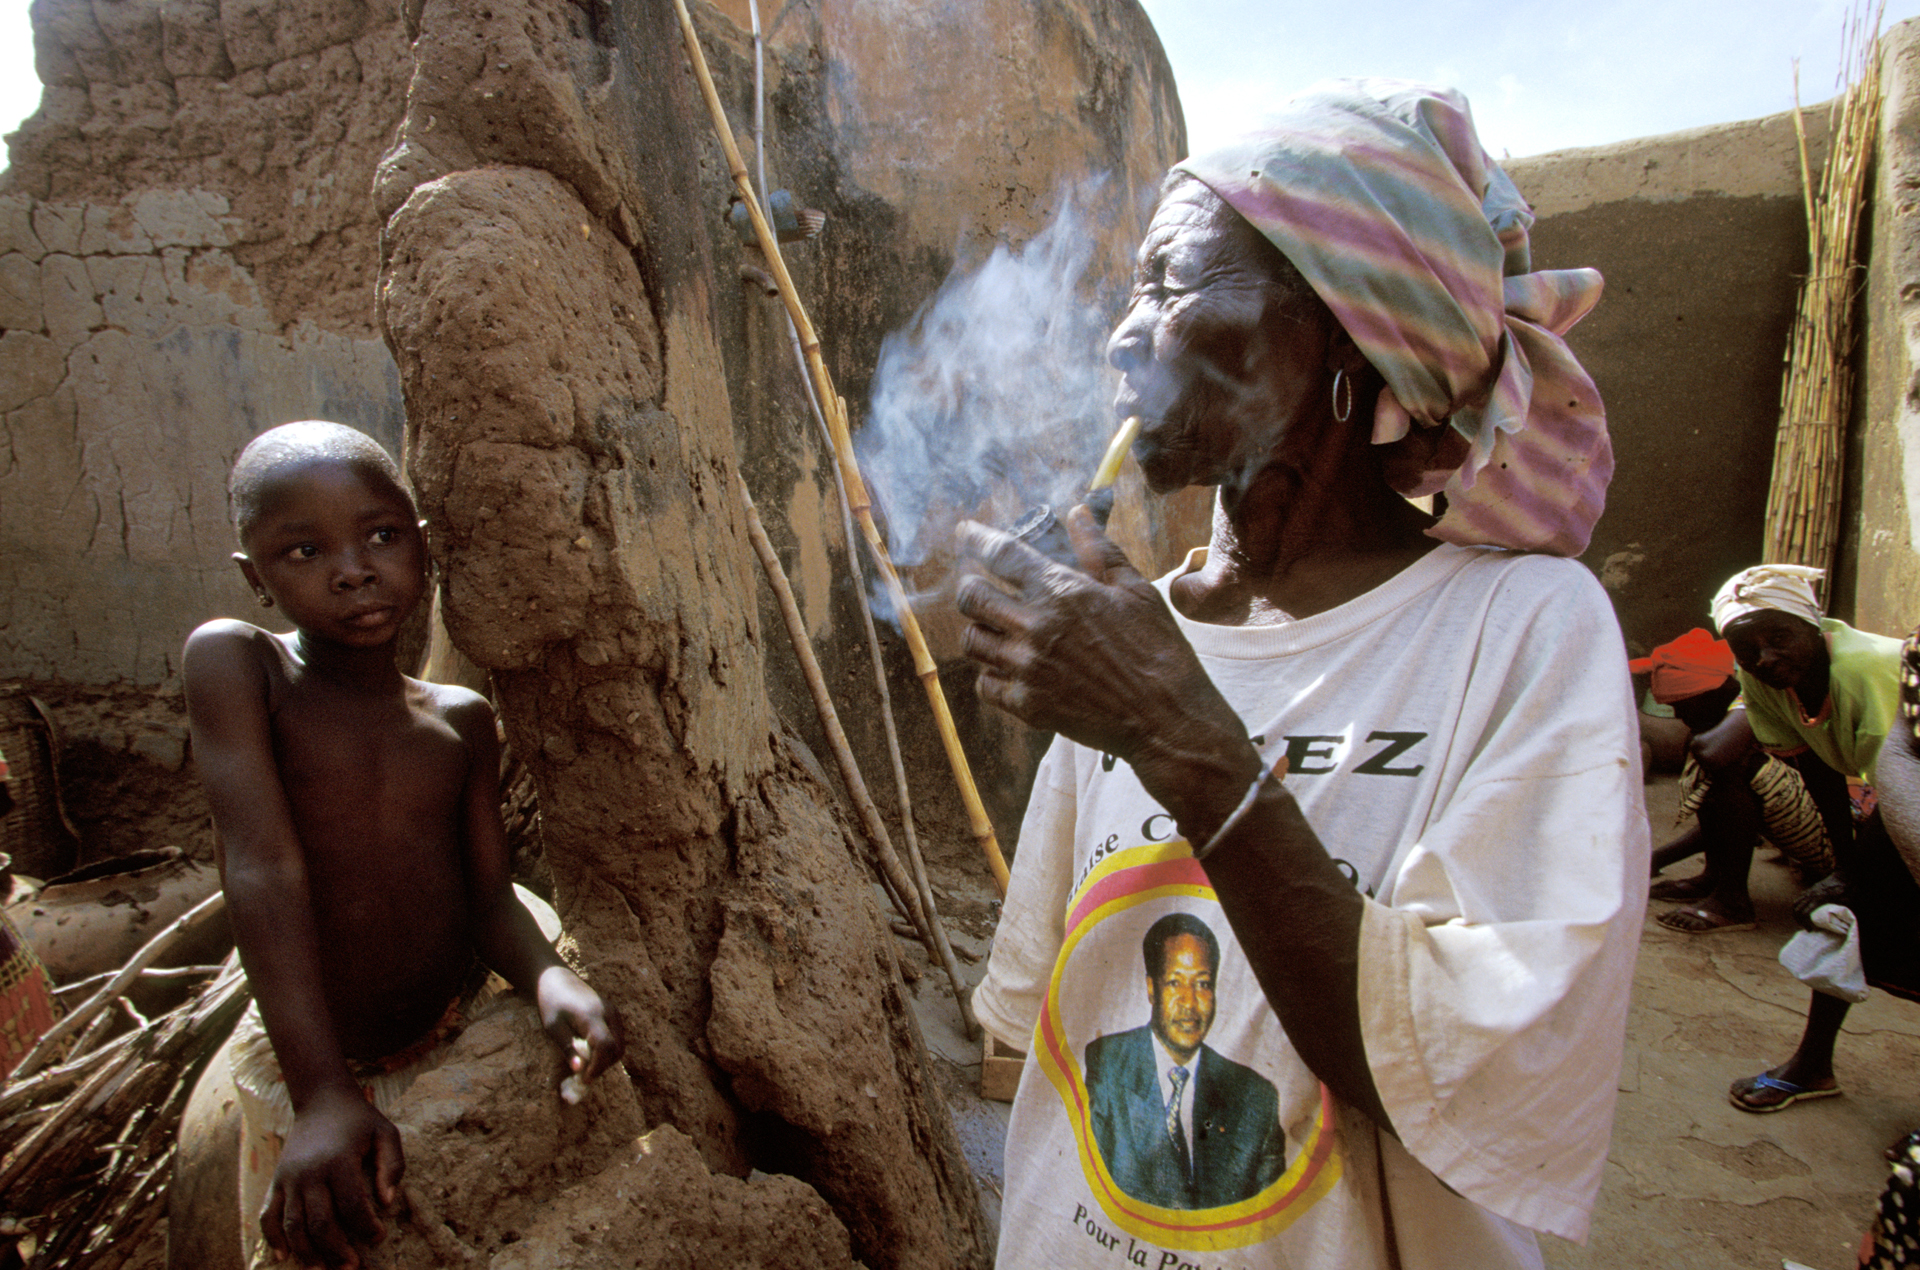  A woman wearing a shirt that identifies her as a supporter of President Compaore takes a break to smoke a pipe during 'House painting day' in the village of Tiebélé.  Tiebélé, Burkina Faso  